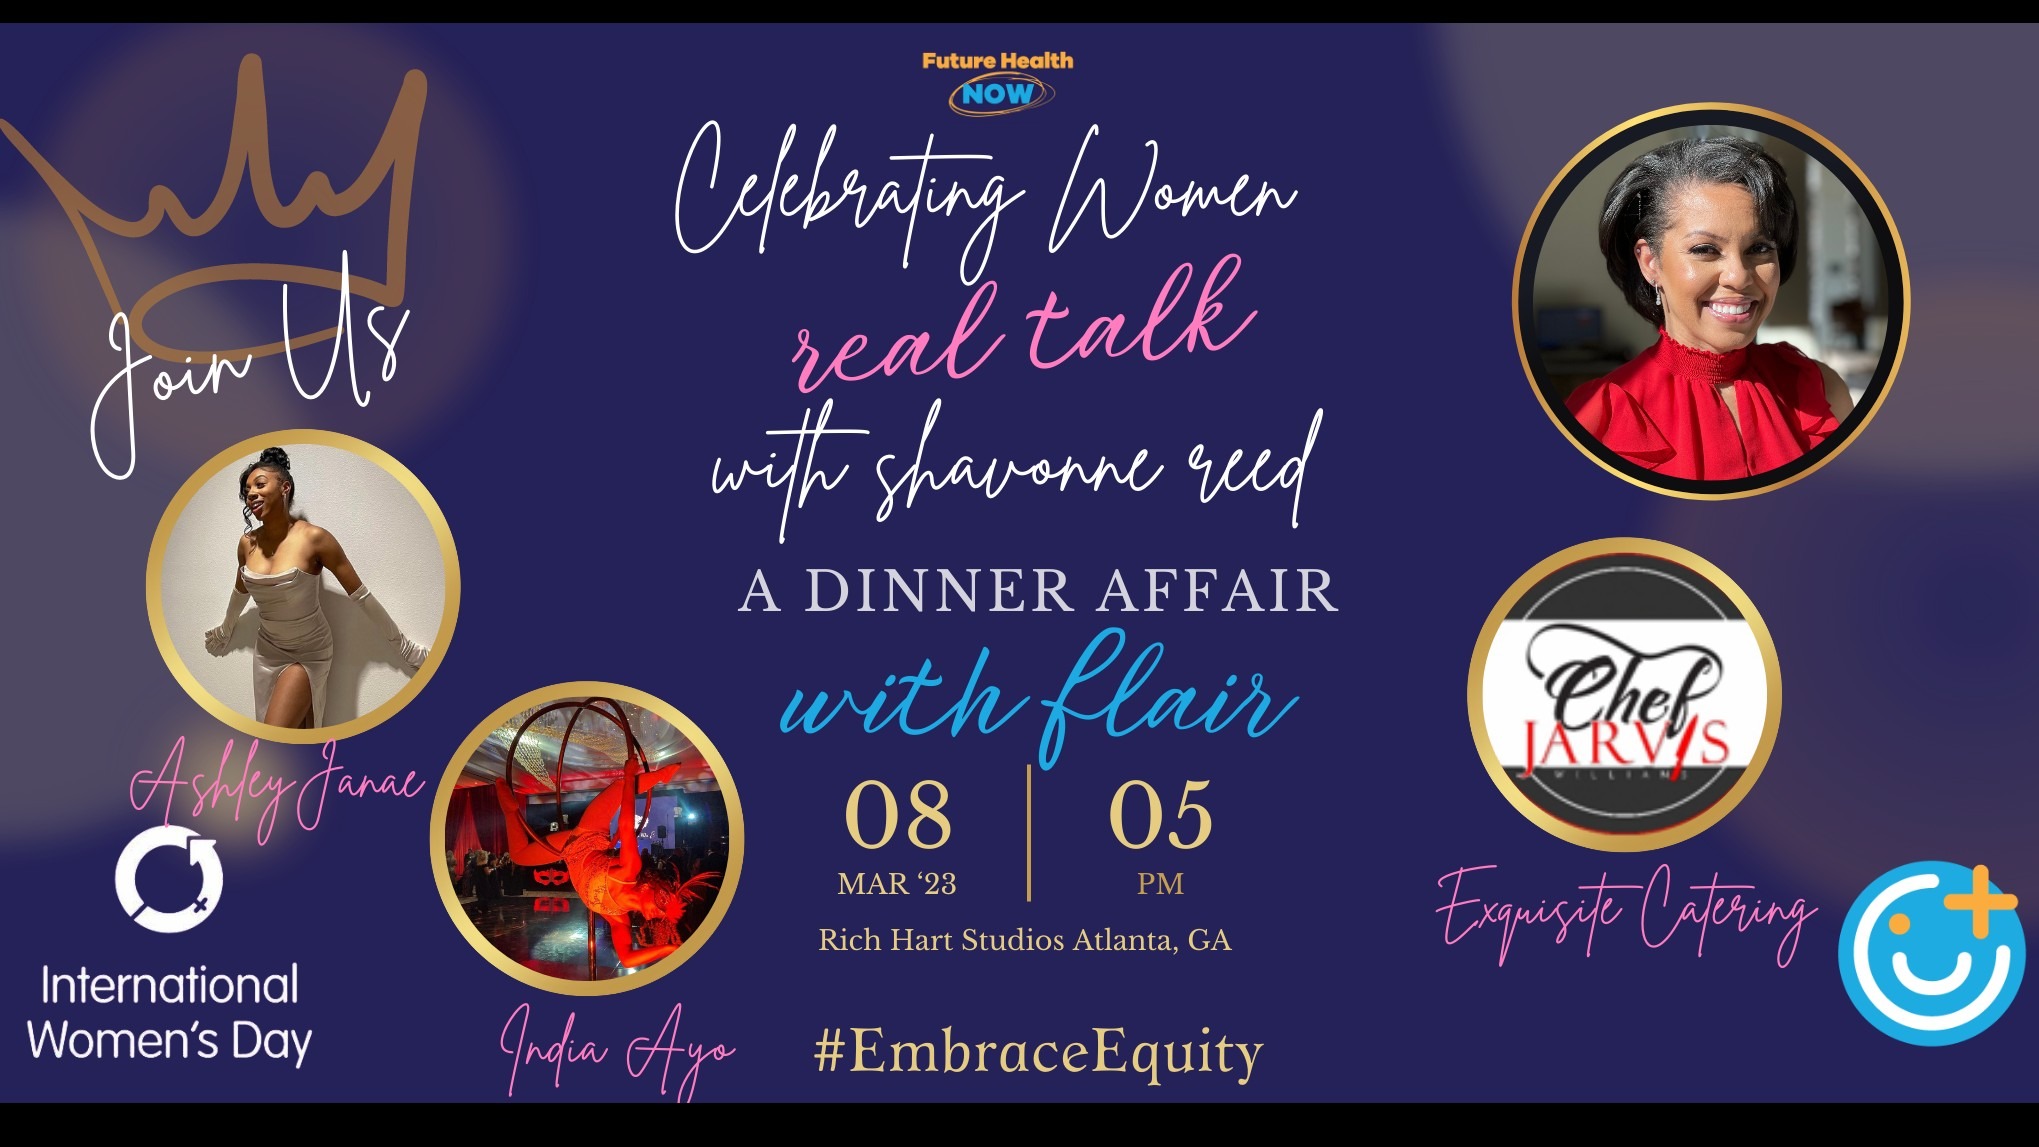 Join This Atlanta Live Event To Discuss Gender Equality & Women's Empowerment